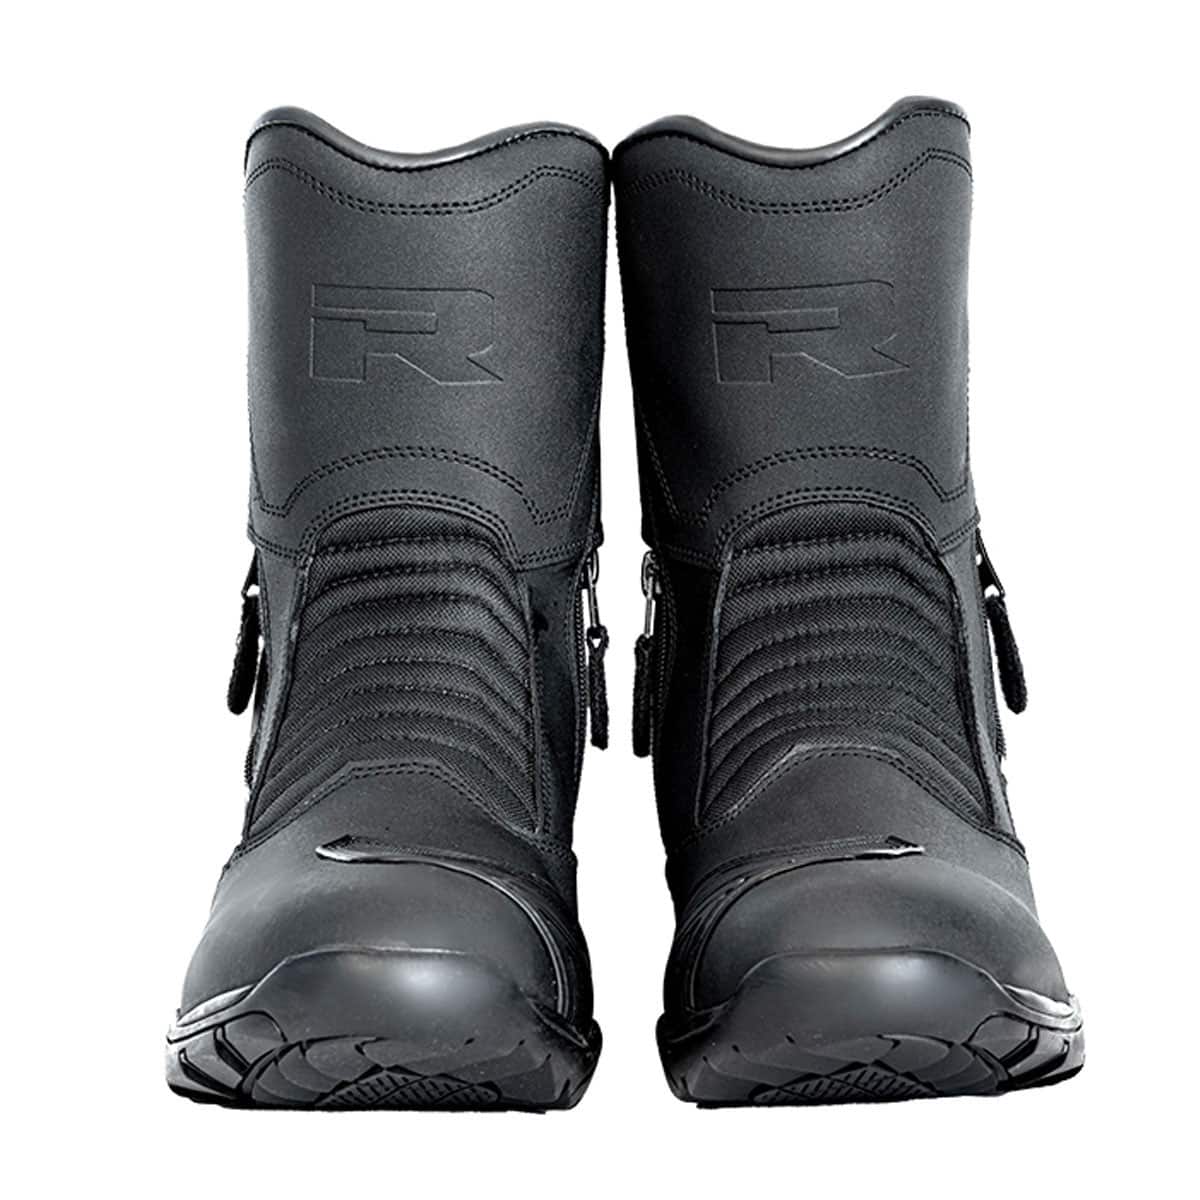 Richa waterproof short touring boots with double zip opening for ease - Front